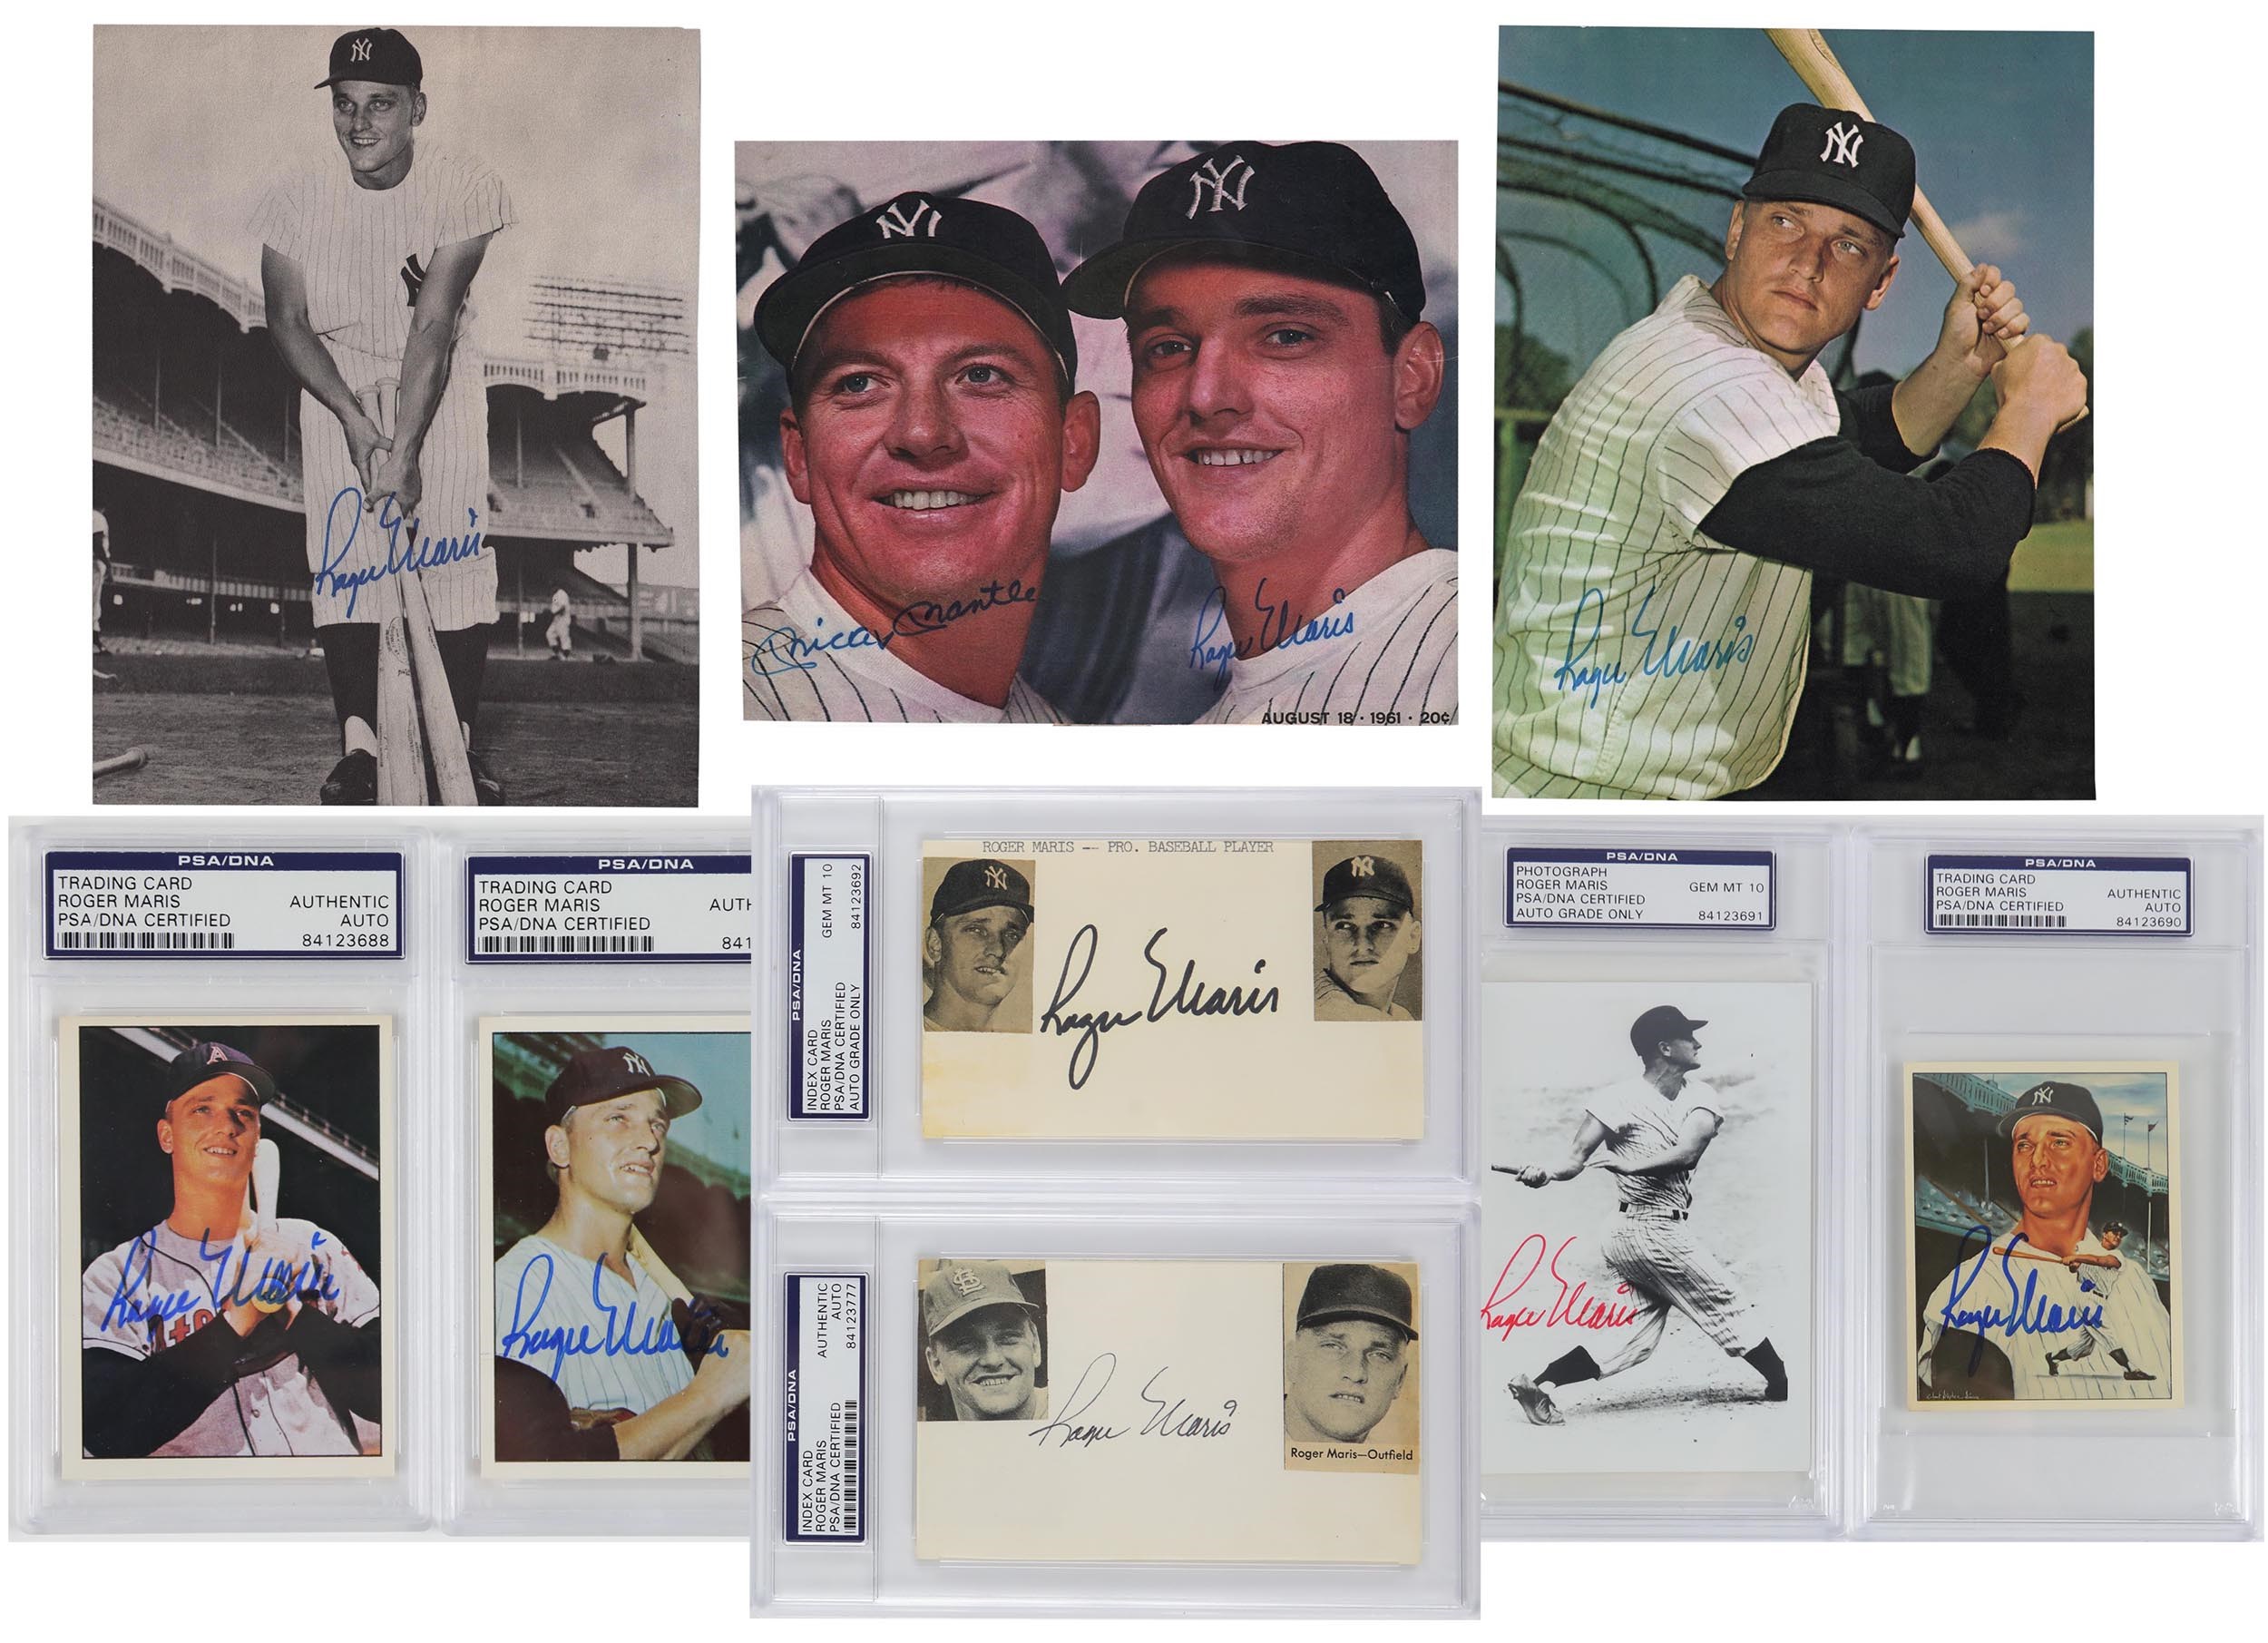 Kubina And The Mick - Quality Roger Maris Autograph Collection w/Mantle & Maris Photo - All PSA Certified (9)